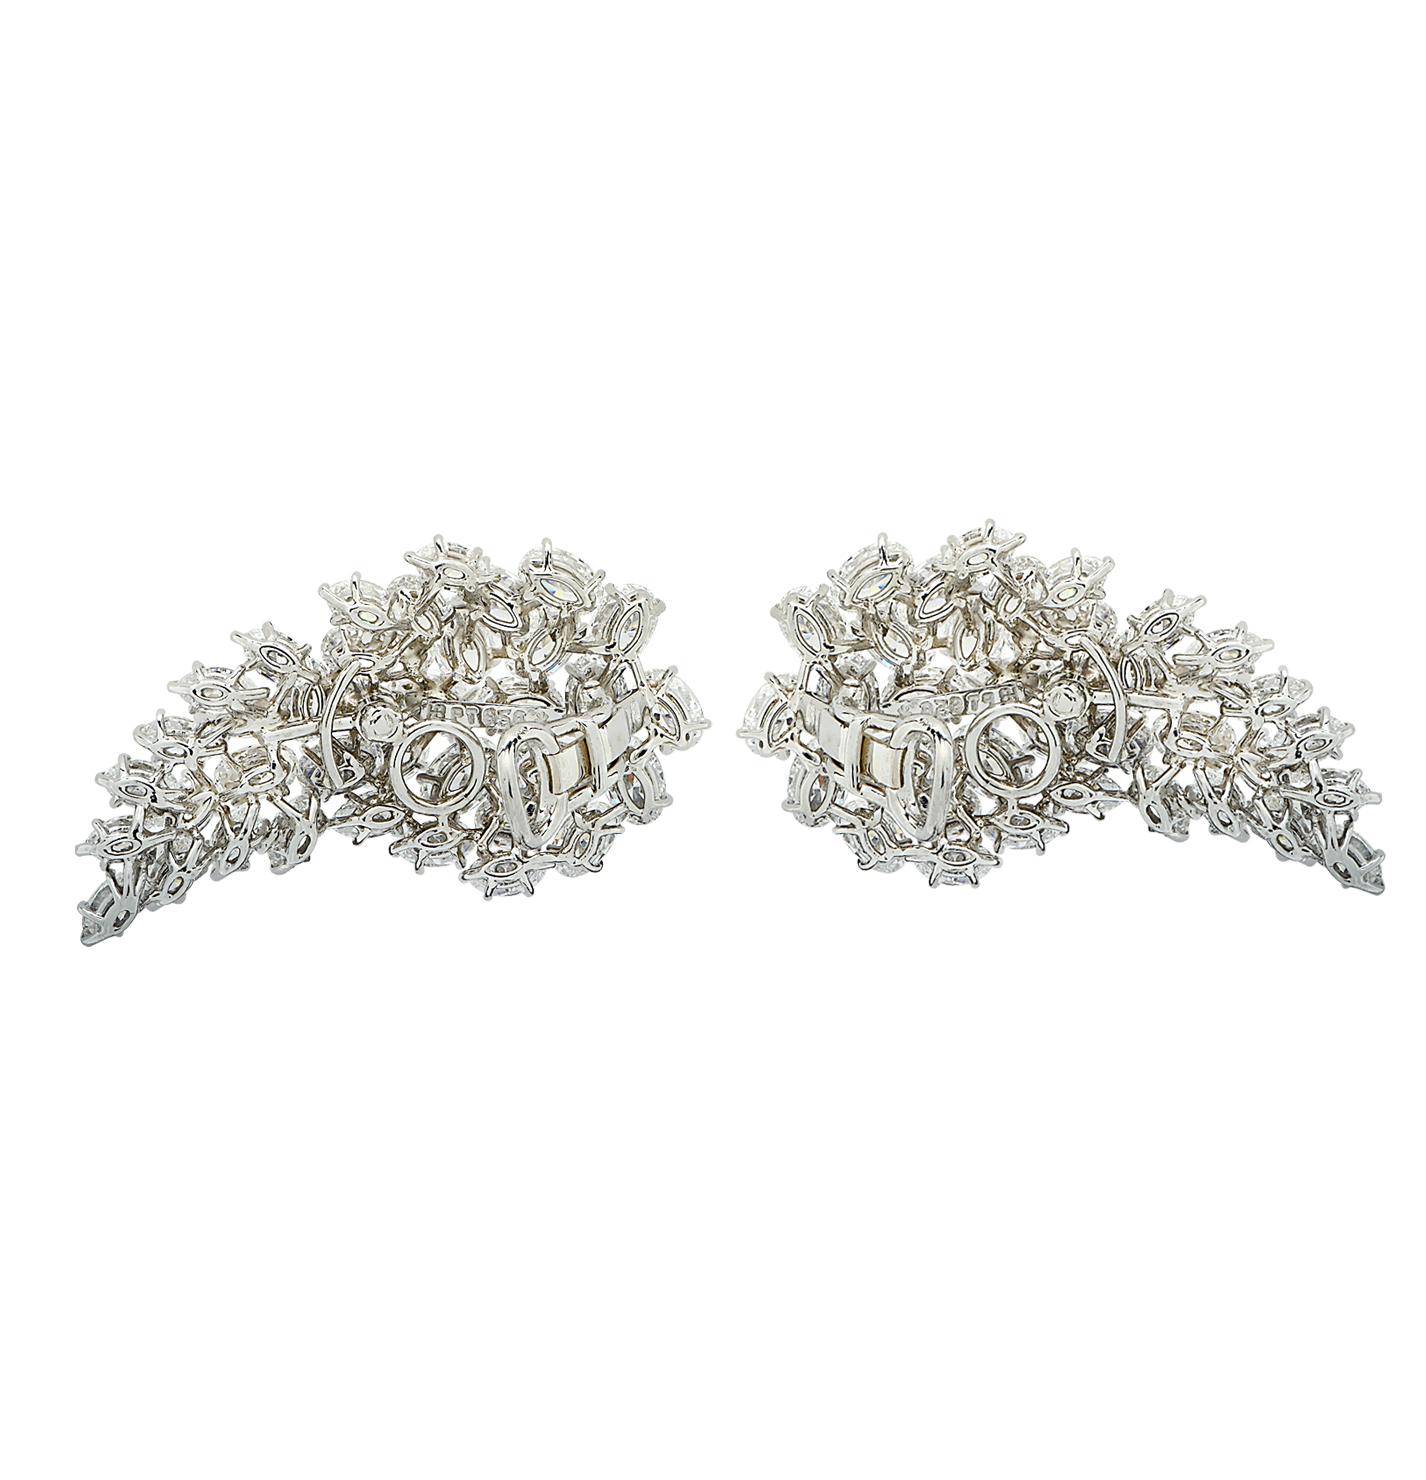 Hammerman Brothers 30 Carat Diamond Earrings In Excellent Condition For Sale In Miami, FL